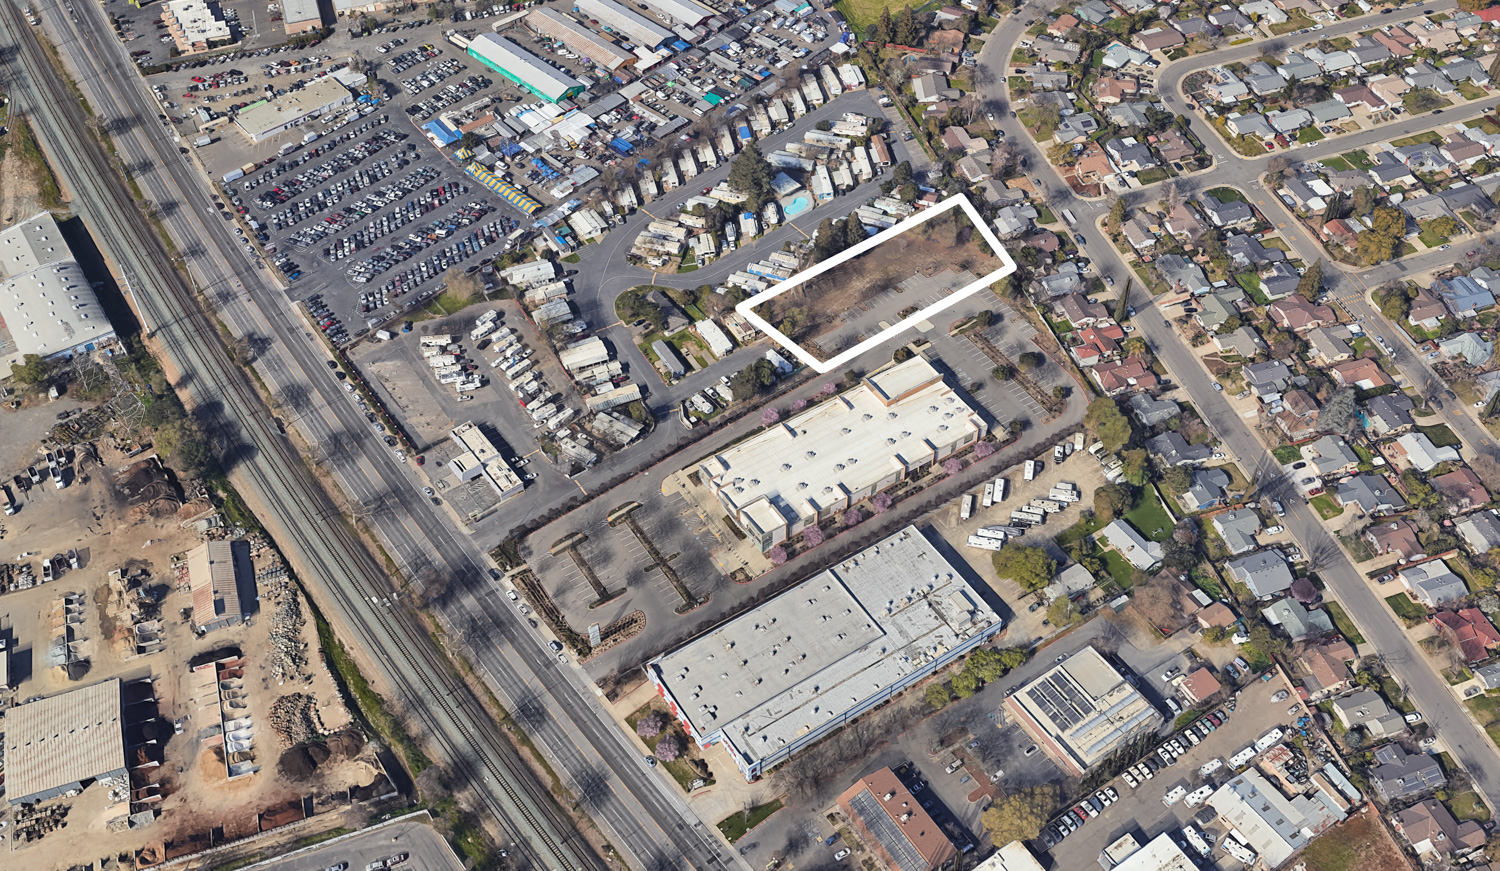 8581 Folsom Boulevard, image via Google Satellite with the apartment site outlined in white